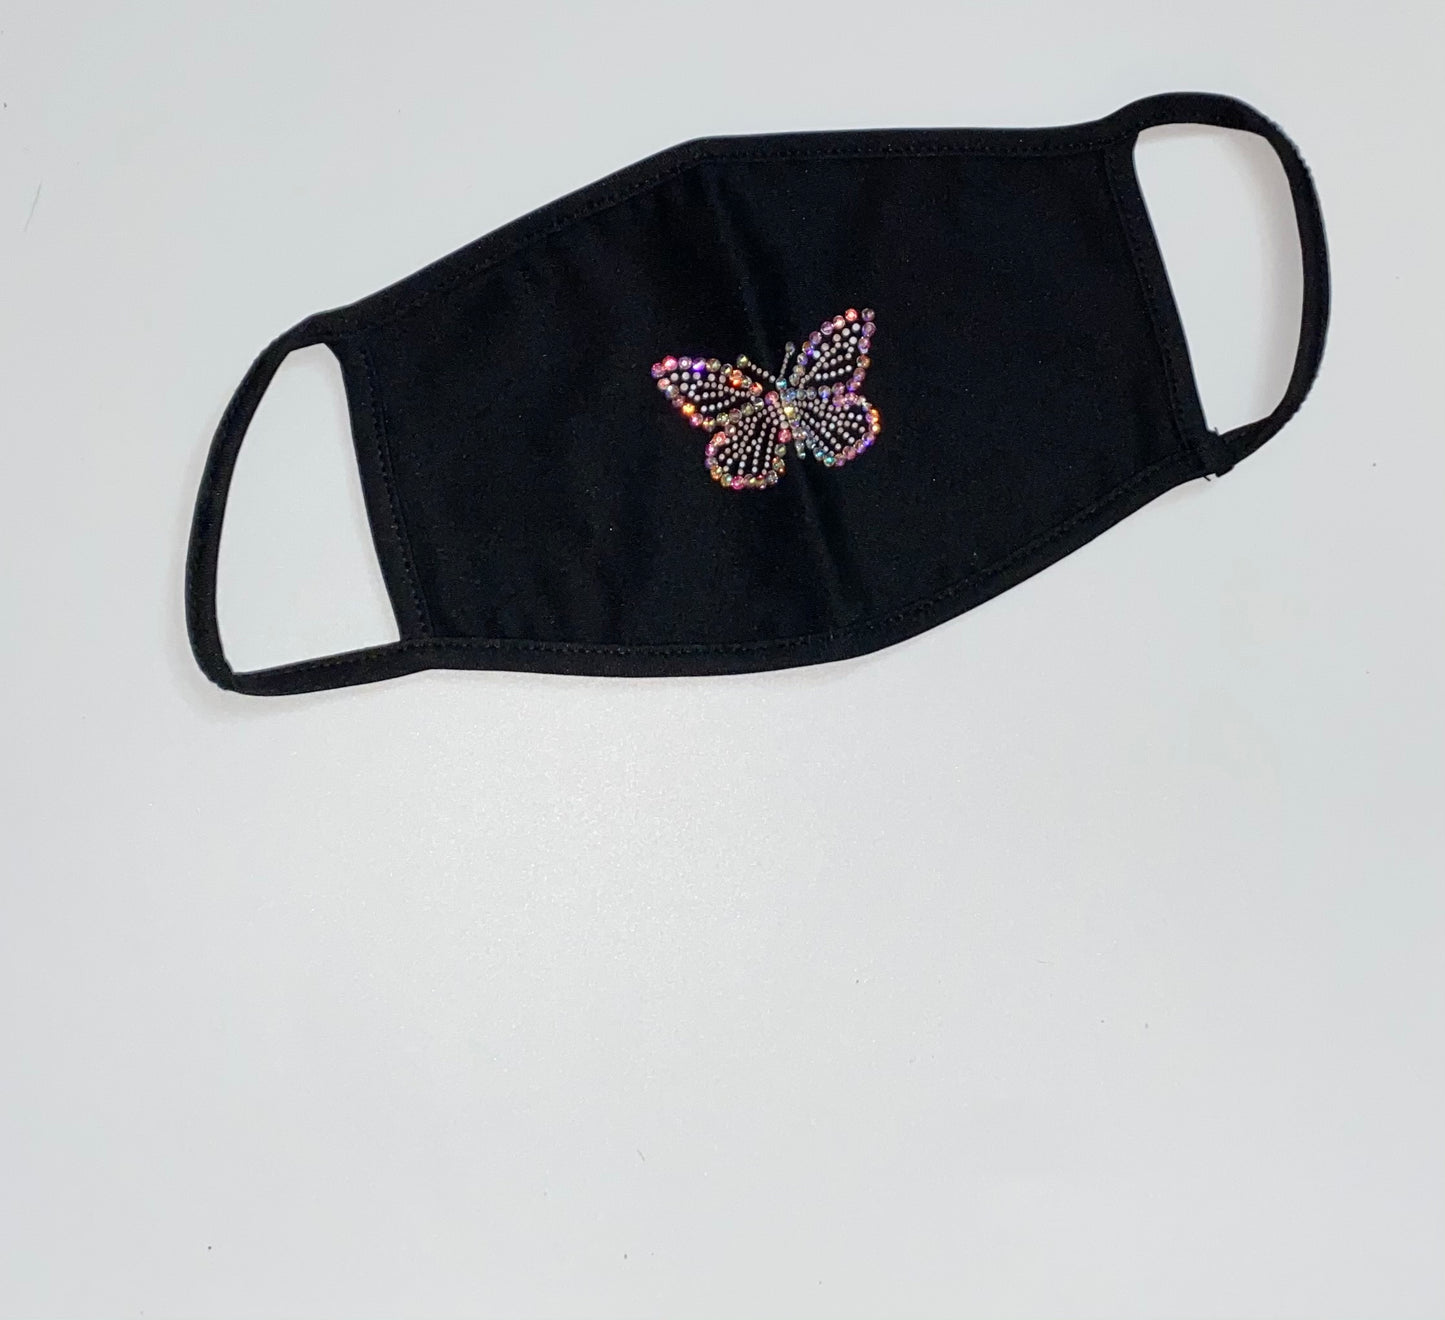 Iridescent Butterfly Glam Swarovski Crystal Face Mask In Black